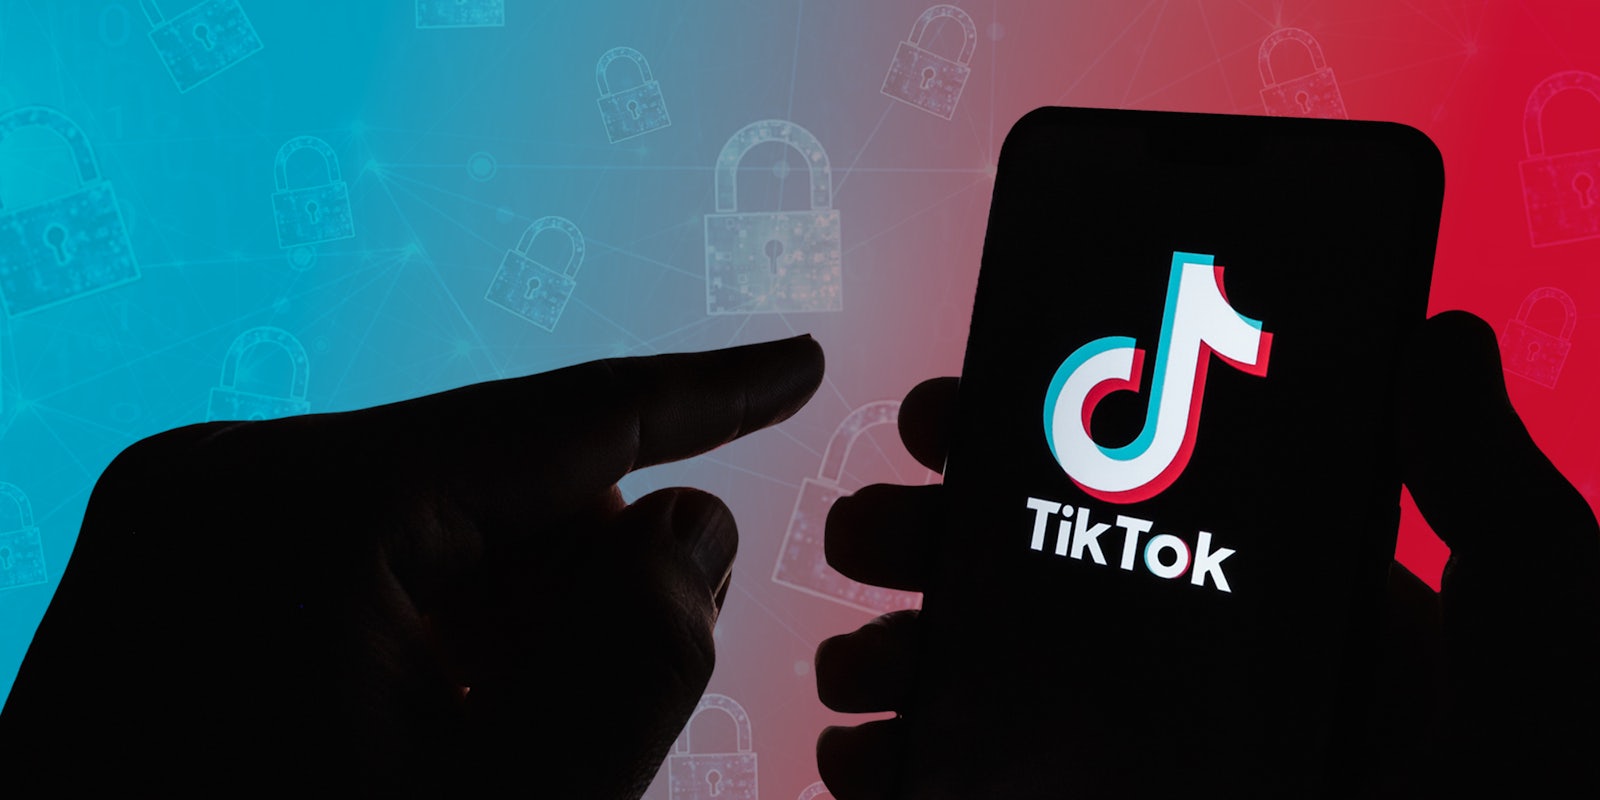 hands with TikTok on phone silhouette in front of blue to red diagonal gradient lock data pattern background